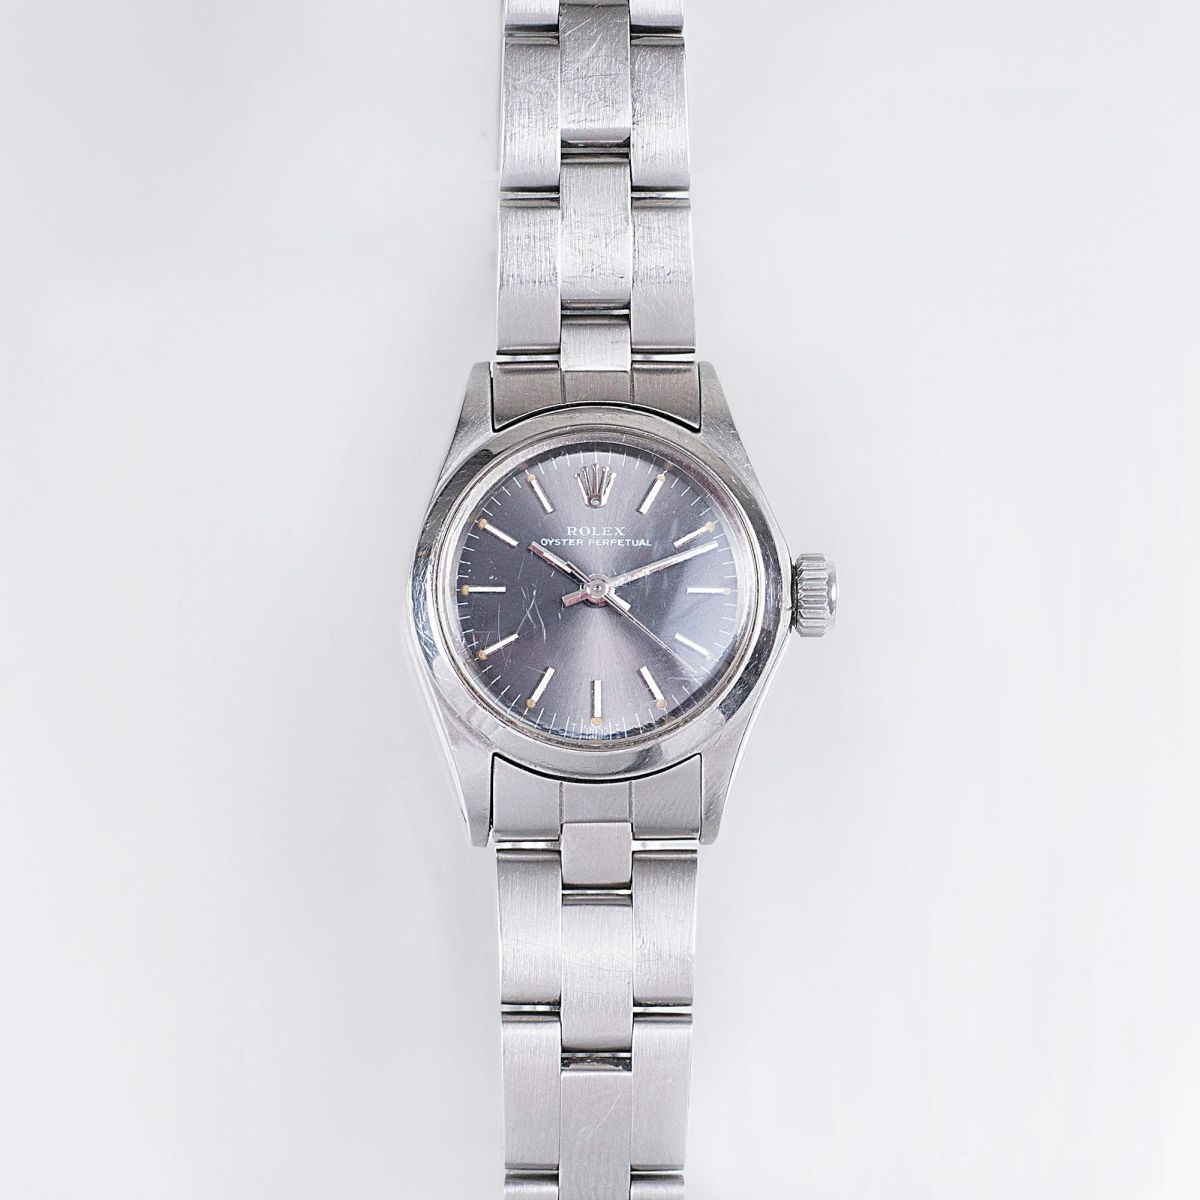 A Ladies' Watch 'Oyster Perpetual'